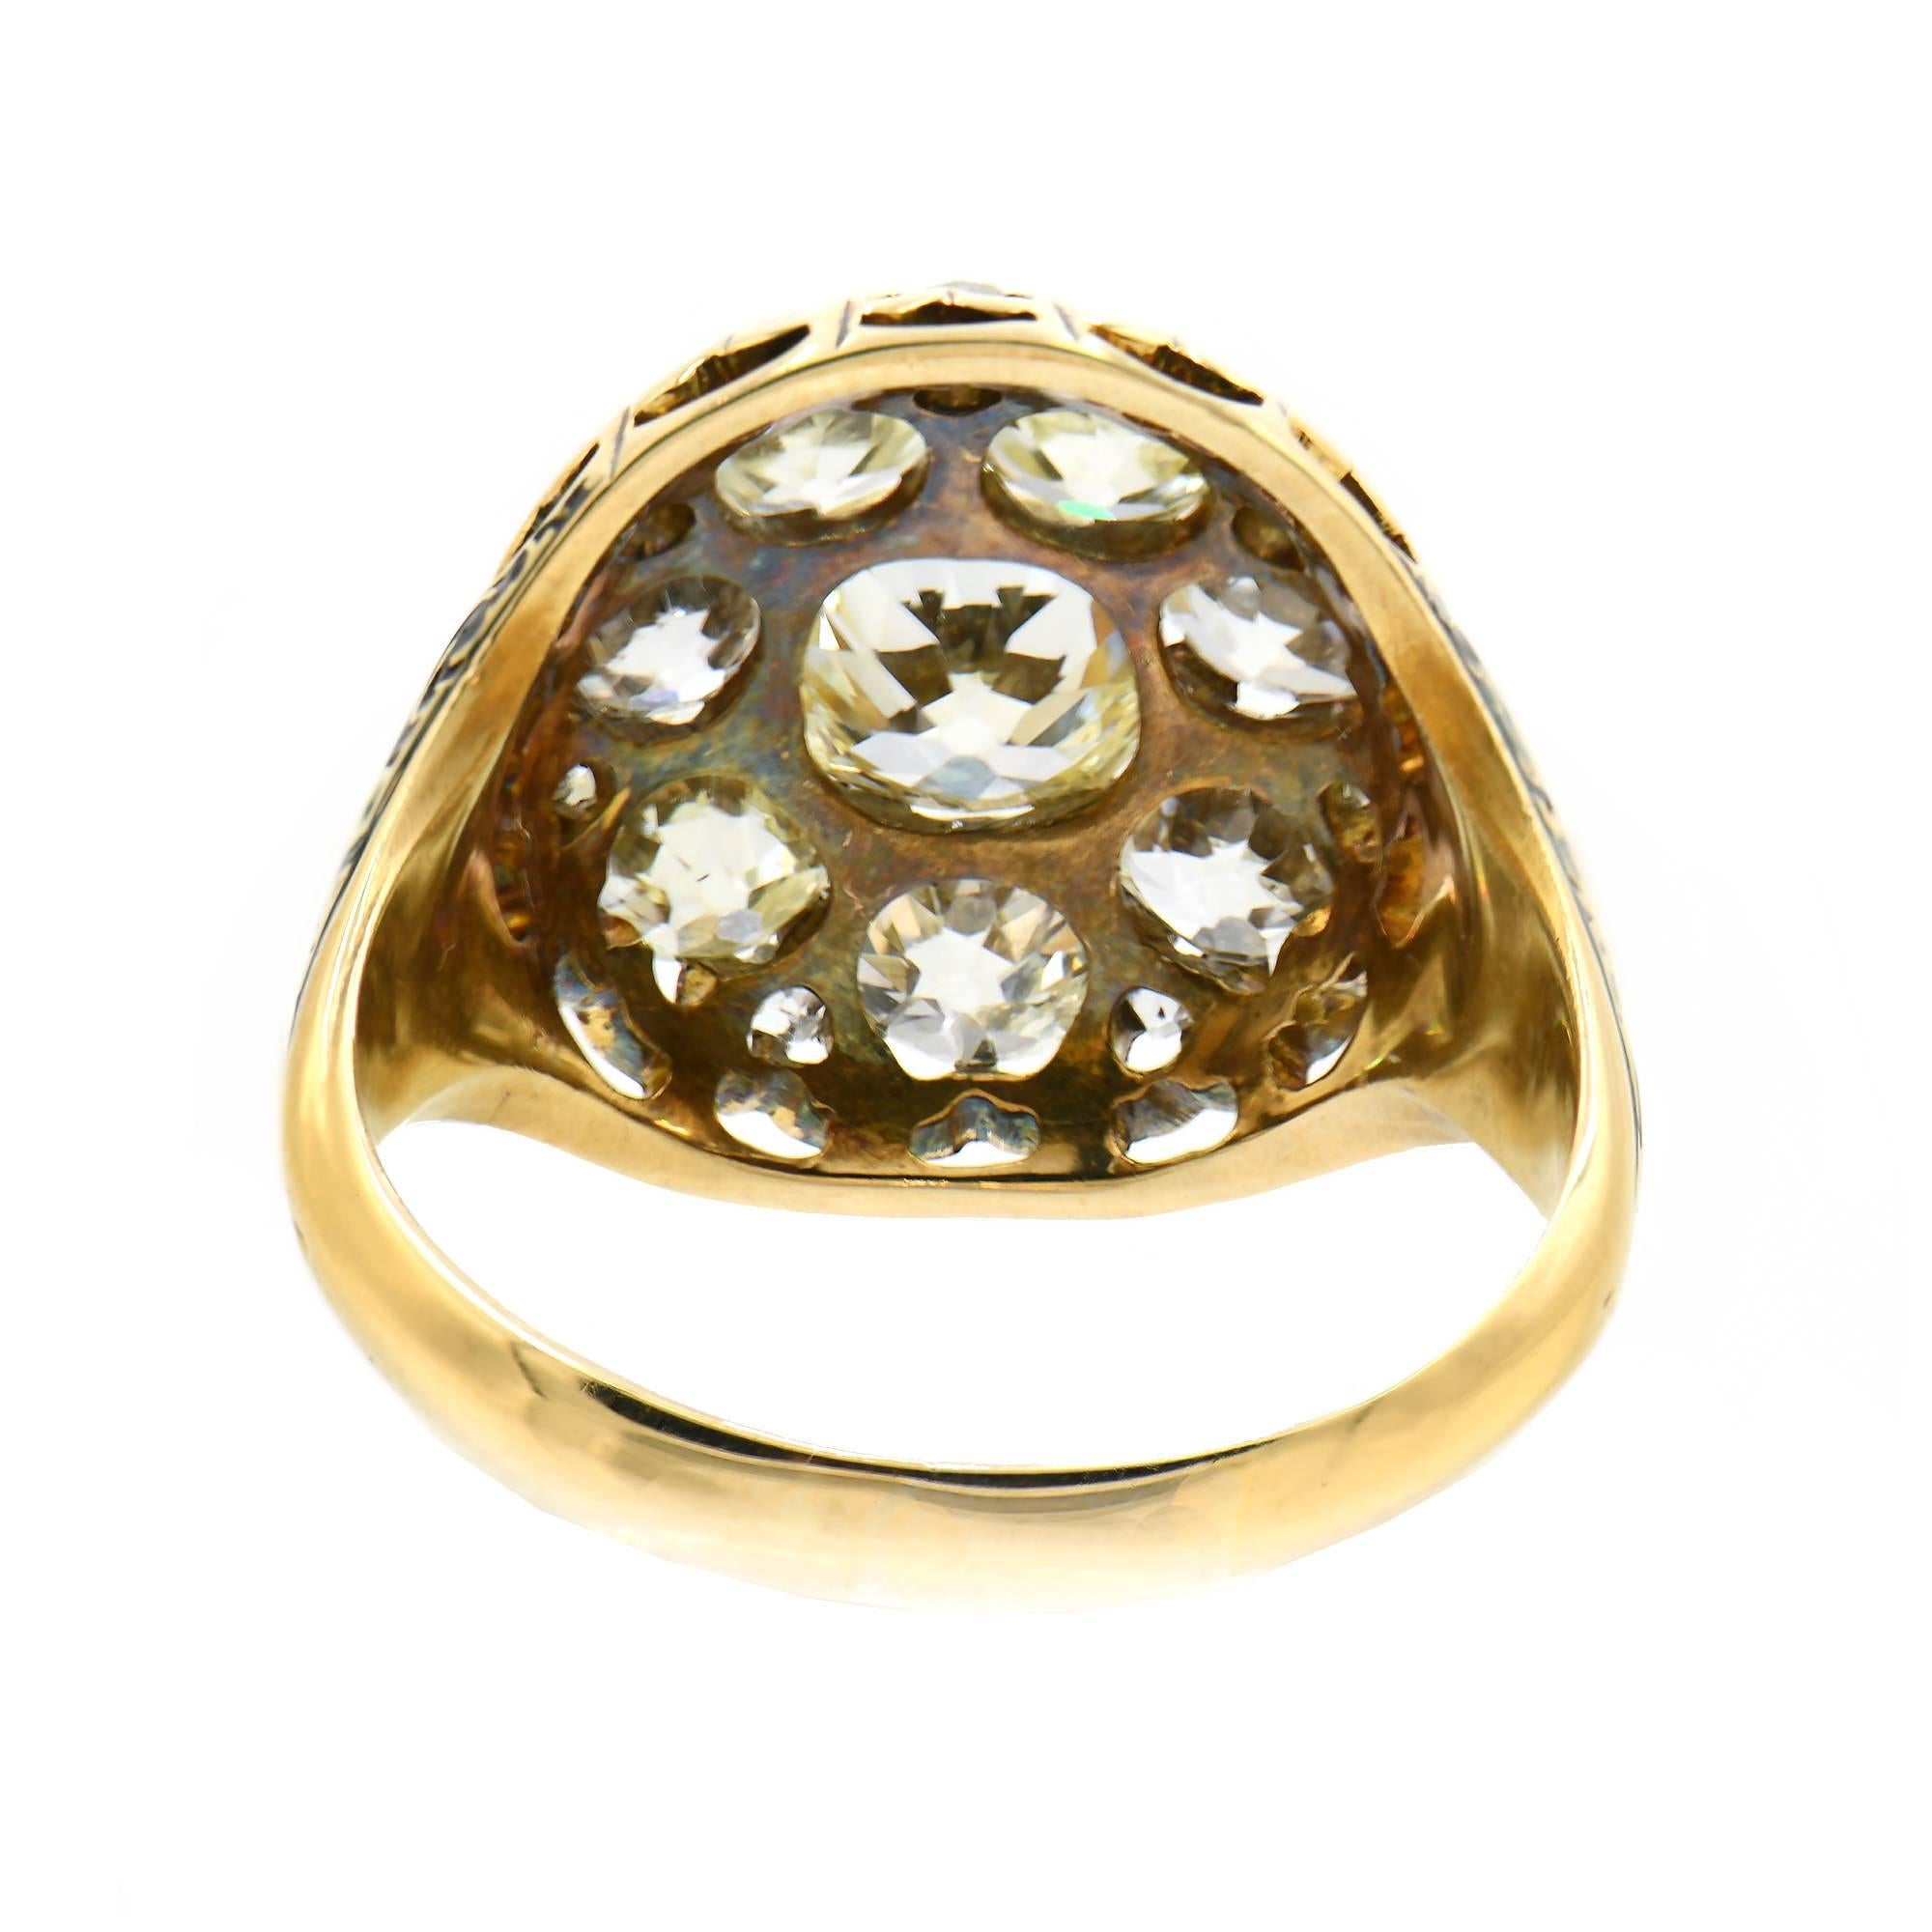 1800s Victorian diamond cluster cocktail ring. 3.05cts diamonds set in 18k yellow gold setting with an hand enameled shank.  EGL certified 

1 old mine diamond K-L SI approximate .91 carats EGL Certificate # US 314571701D
7 old mine diamonds